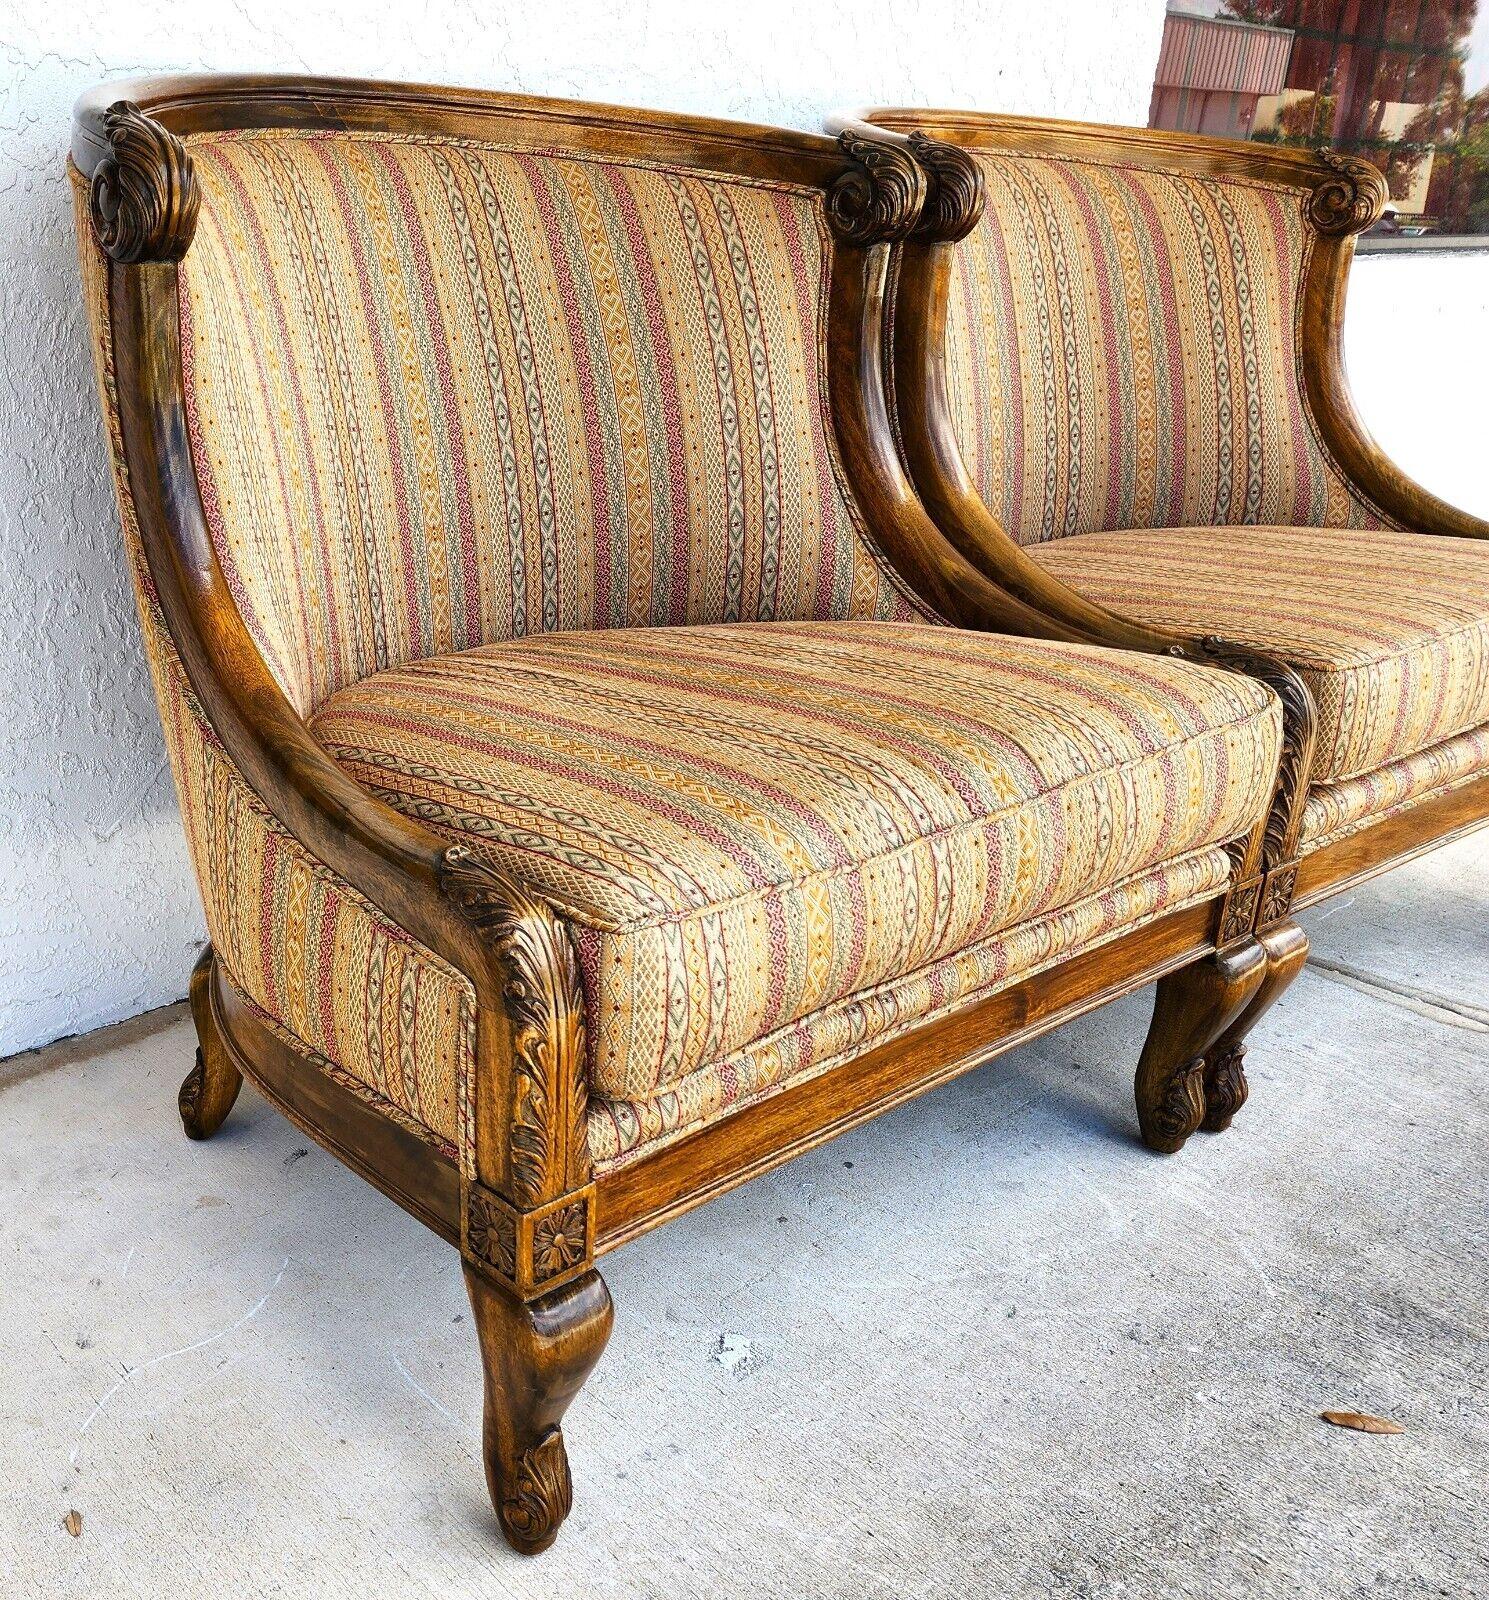 For FULL item description click on CONTINUE READING at the bottom of this page.

Offering One Of Our Recent Palm Beach Estate Fine Furniture Acquisitions Of A 
Set of 2 French Provincial Louis XV Oversized Lounge Chairs 
Attributed to Marge